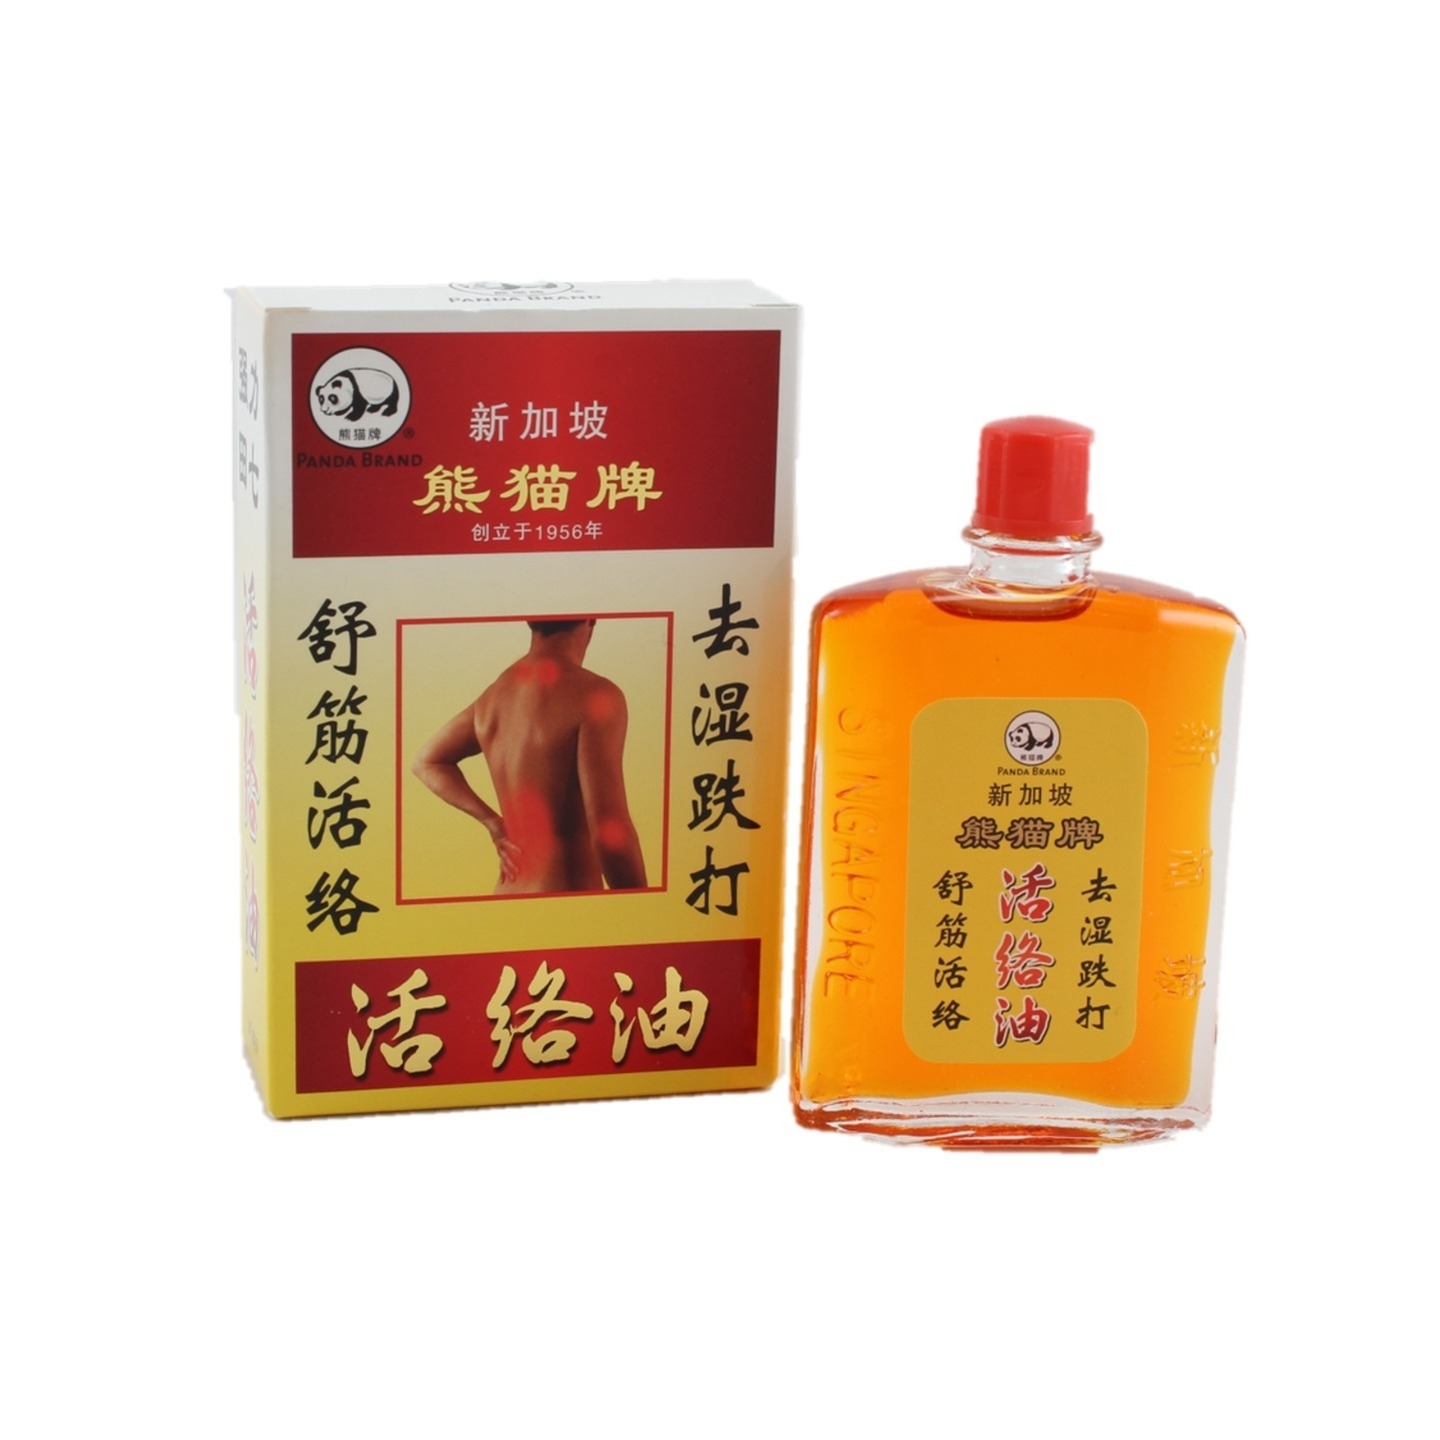 Medicated Oil 活络油 PROMOTION FOR 12